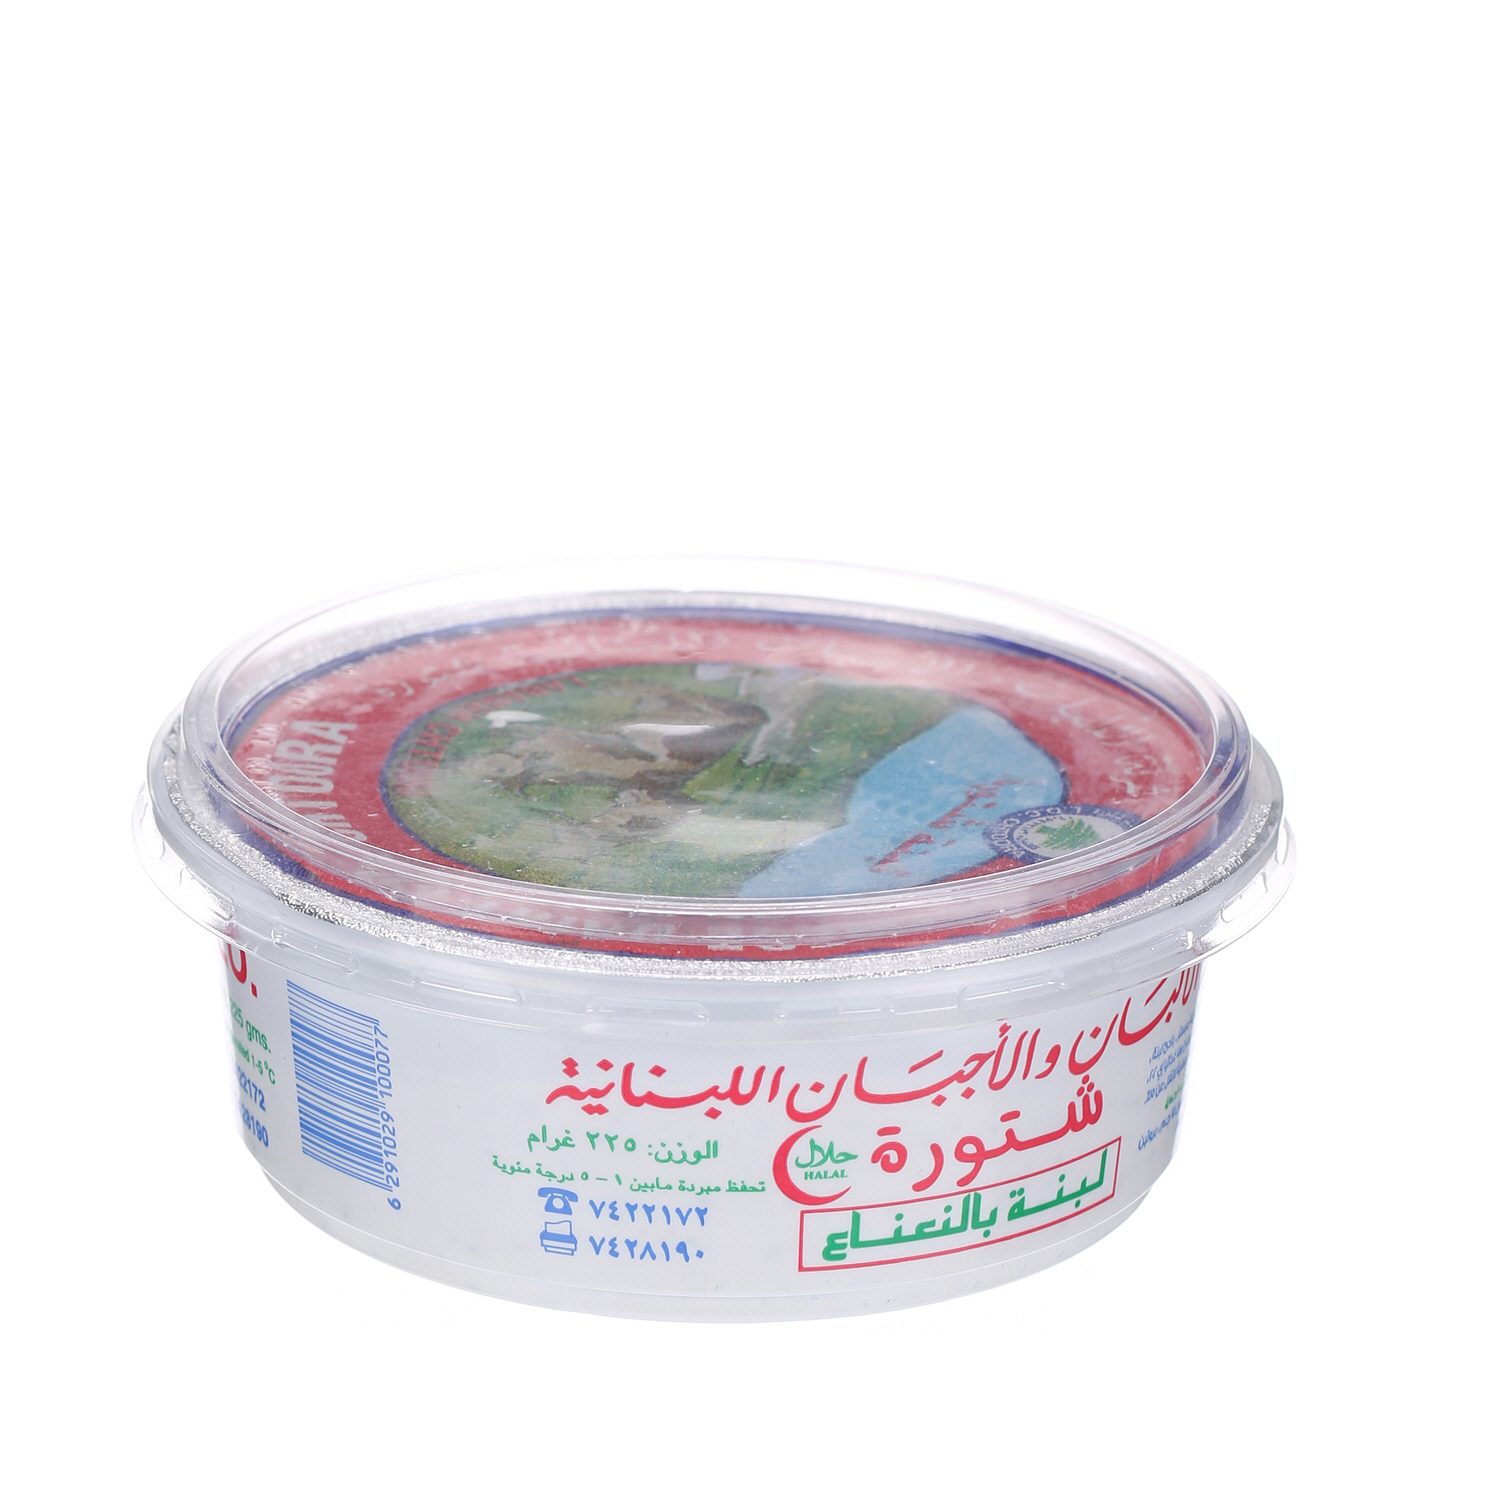 Chtoora Labnah with Mint 225 g